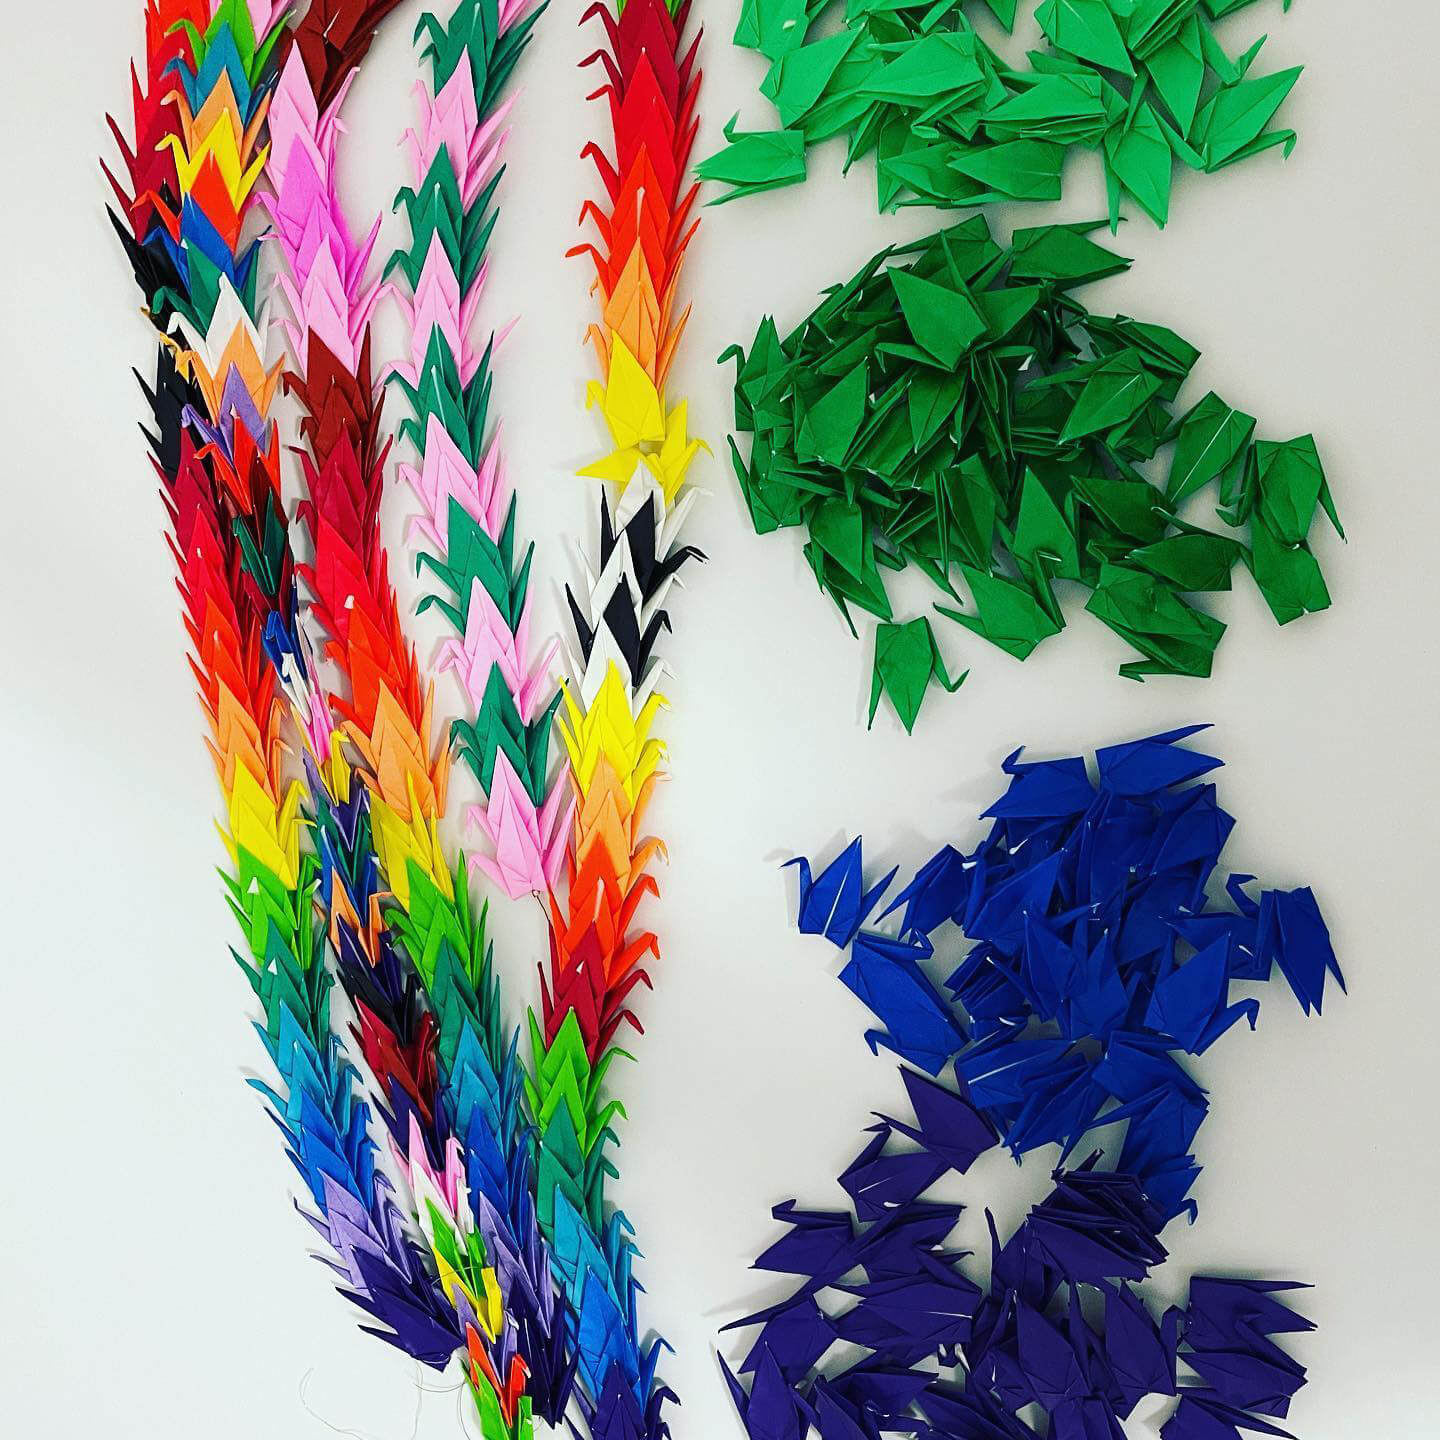 multi colored origami swan's stringed together.